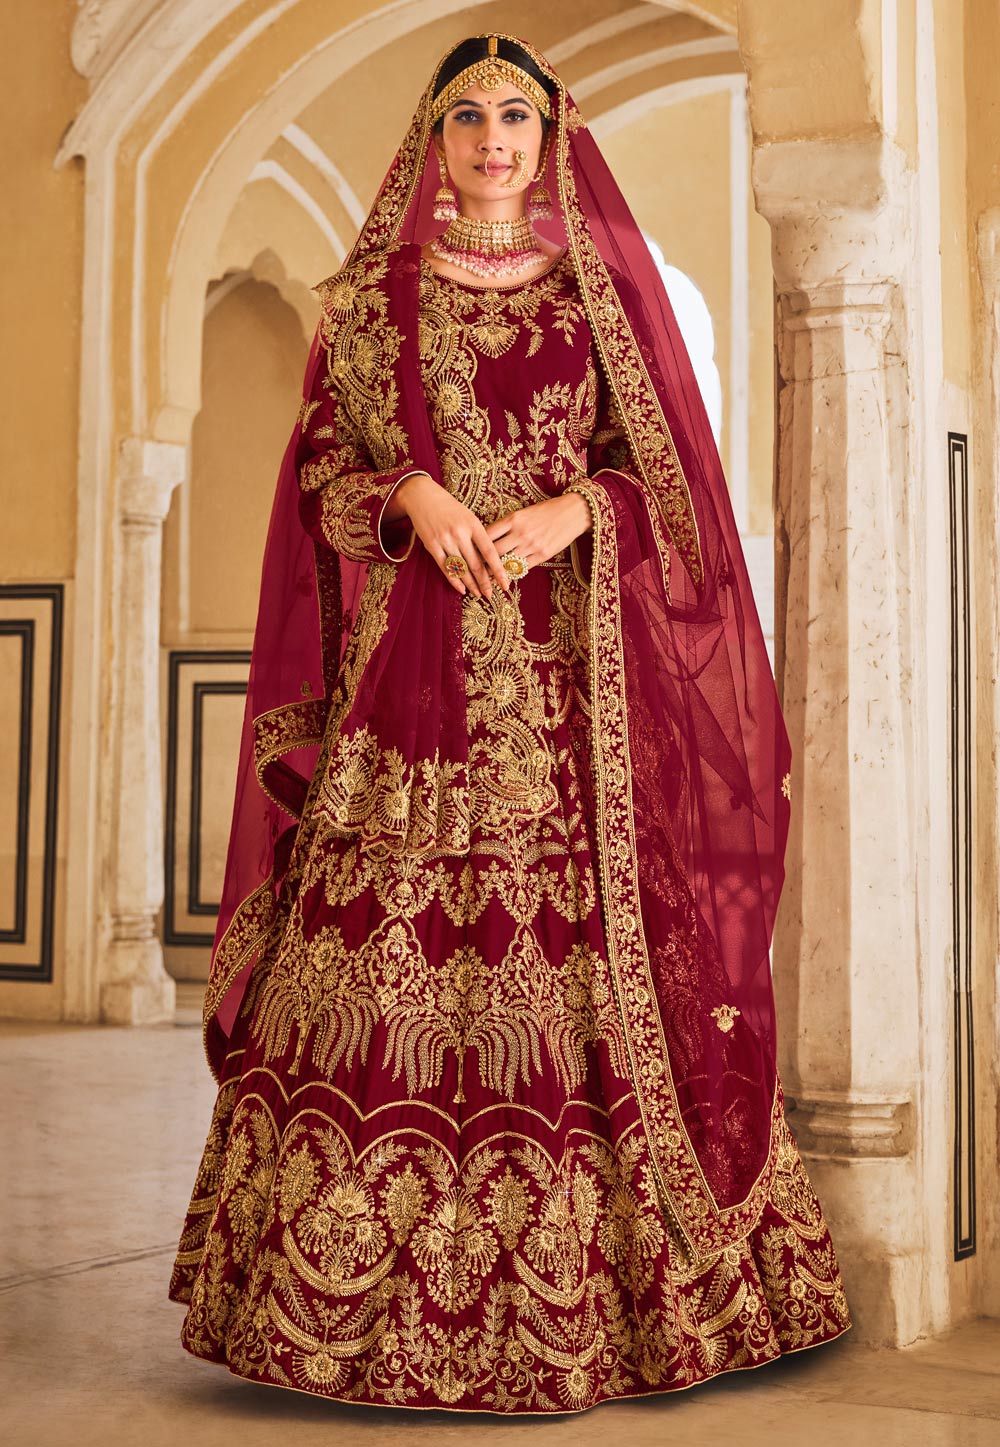 Bridal Lehengas Without Dupatta Are Trending And How